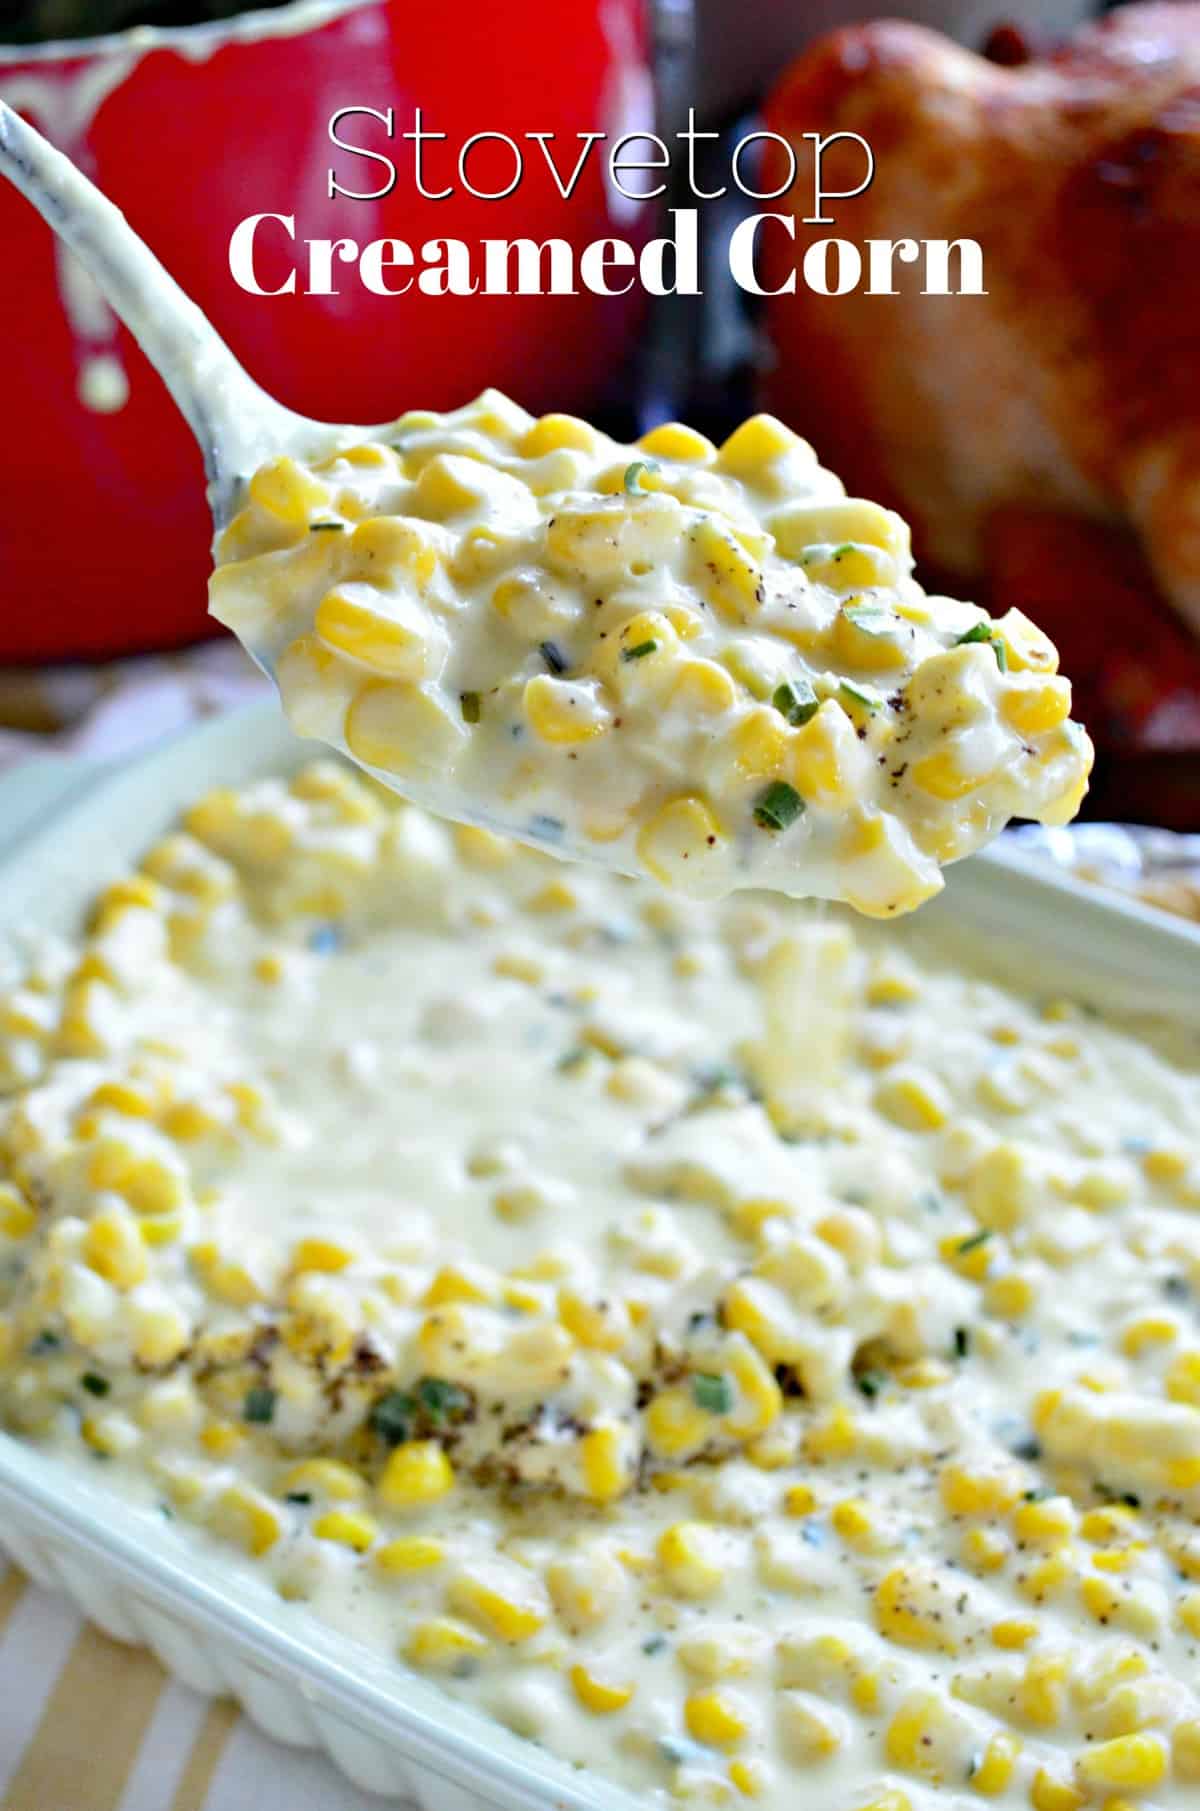 spoonful of creamy corn with pepper and herbs held over casserole dish of creamed corn with title text.